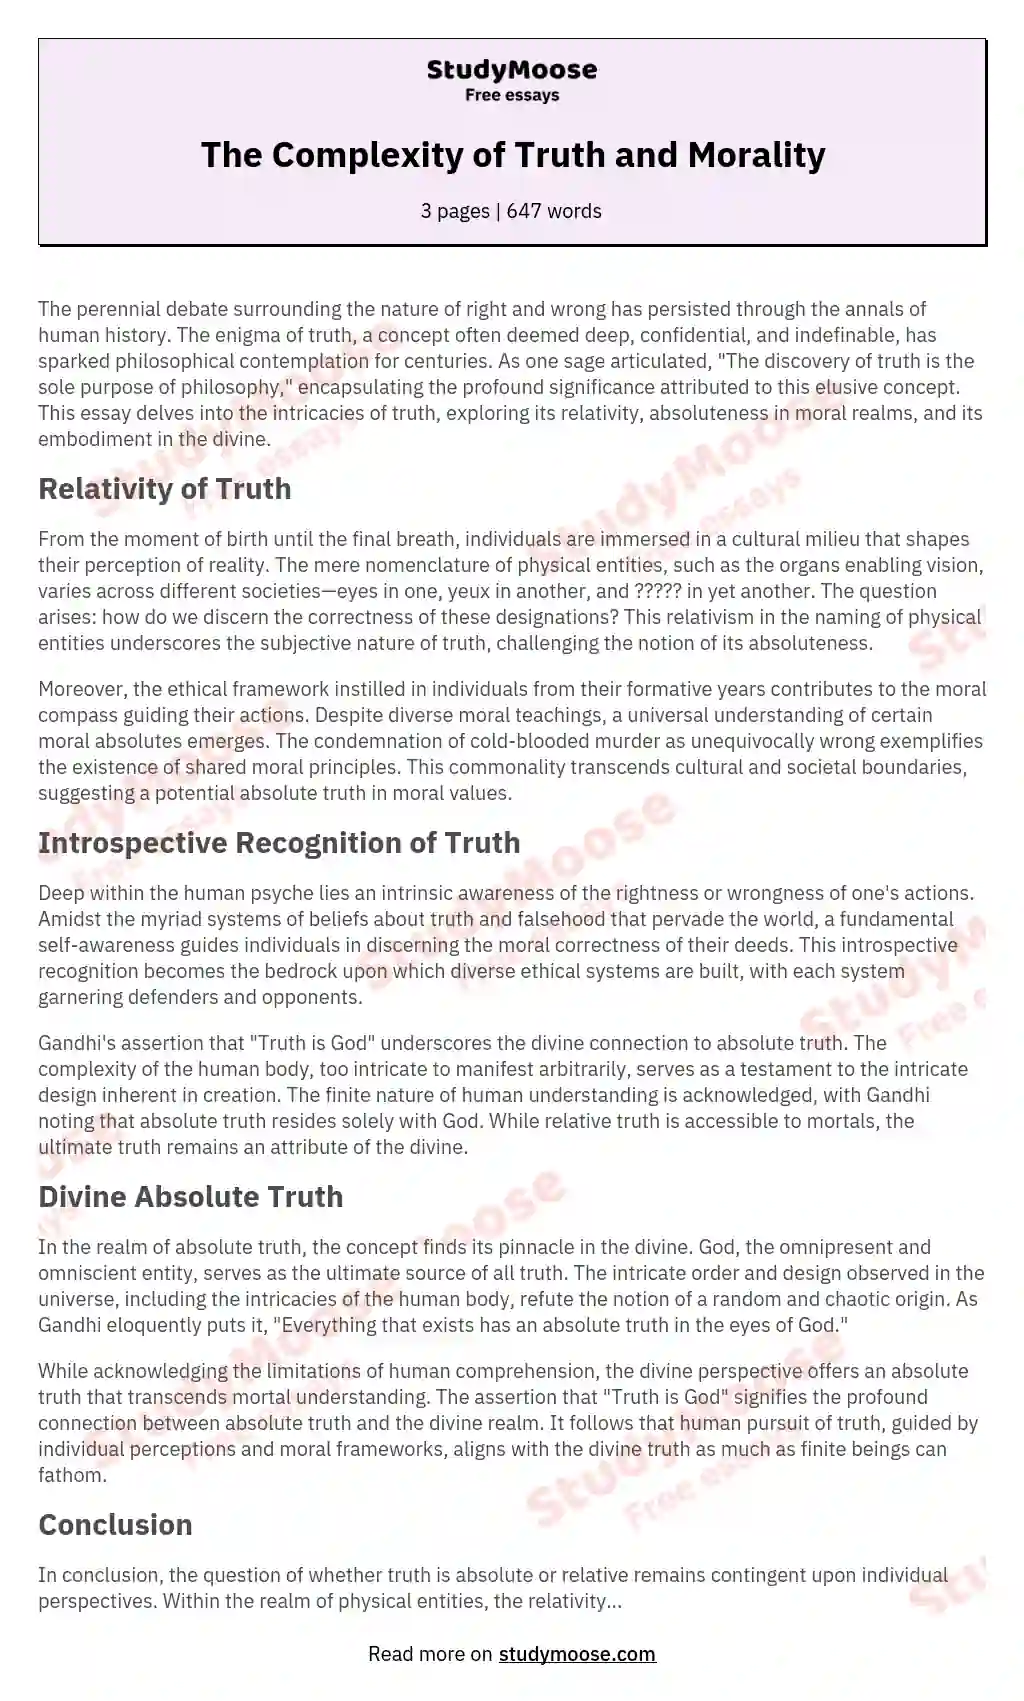 is truth absolute essay